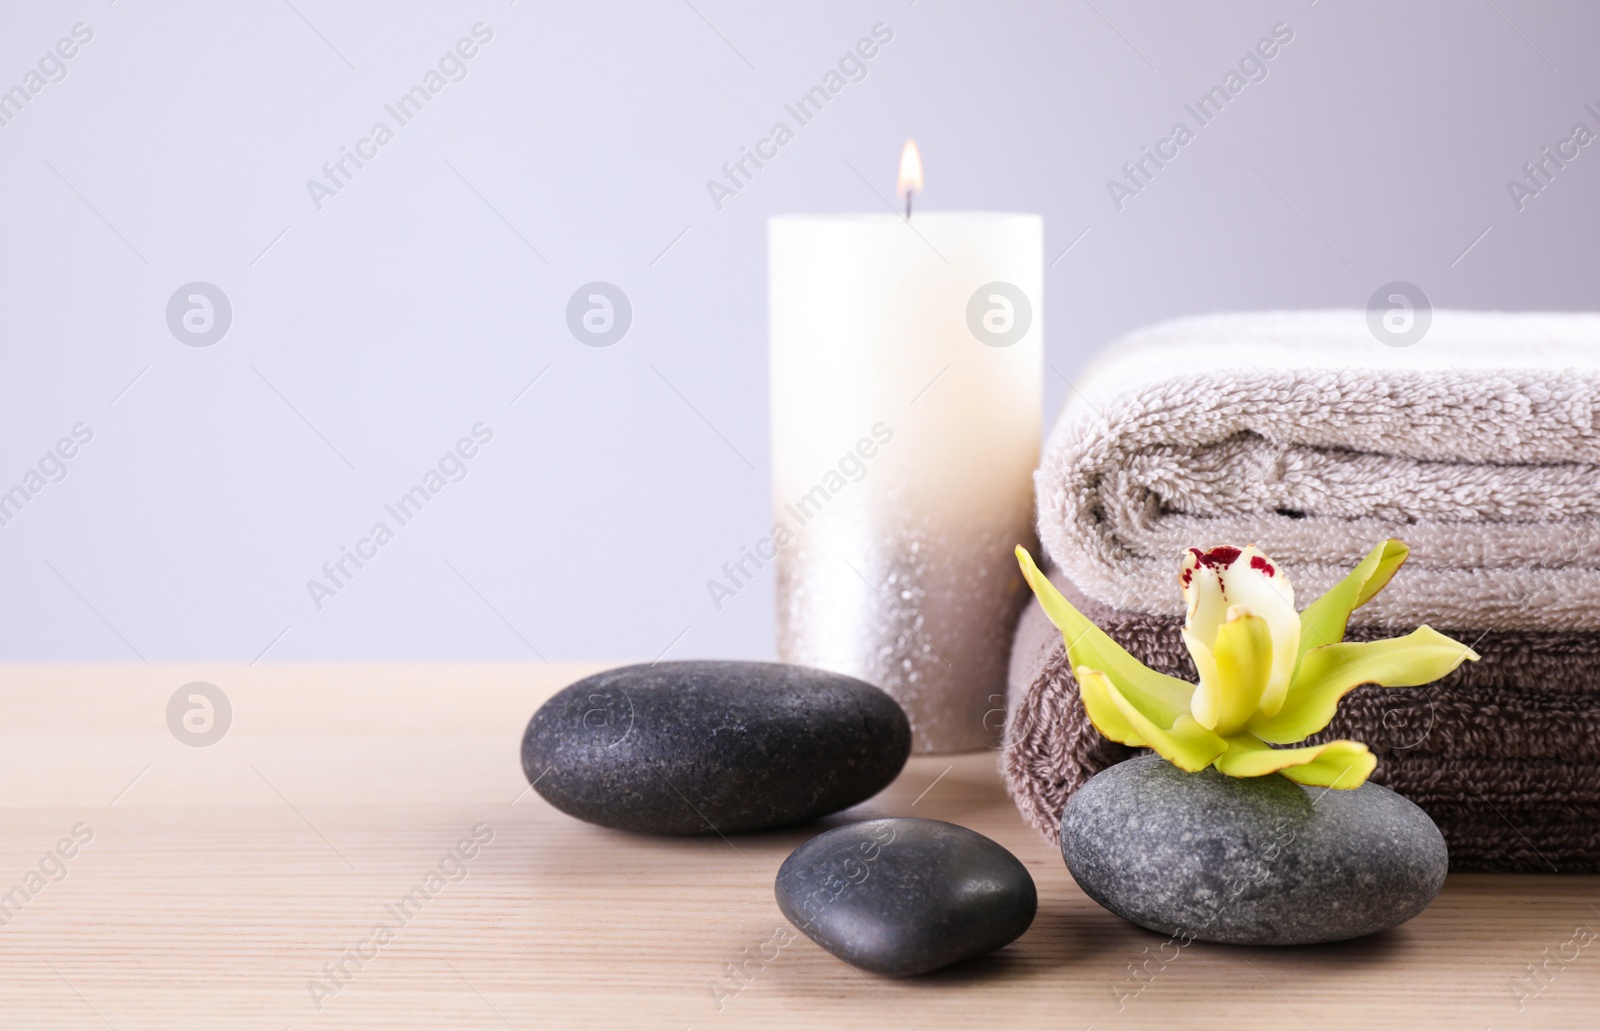 Photo of Spa stones with exotic flower, burning candle and fresh towels on wooden table, space for text